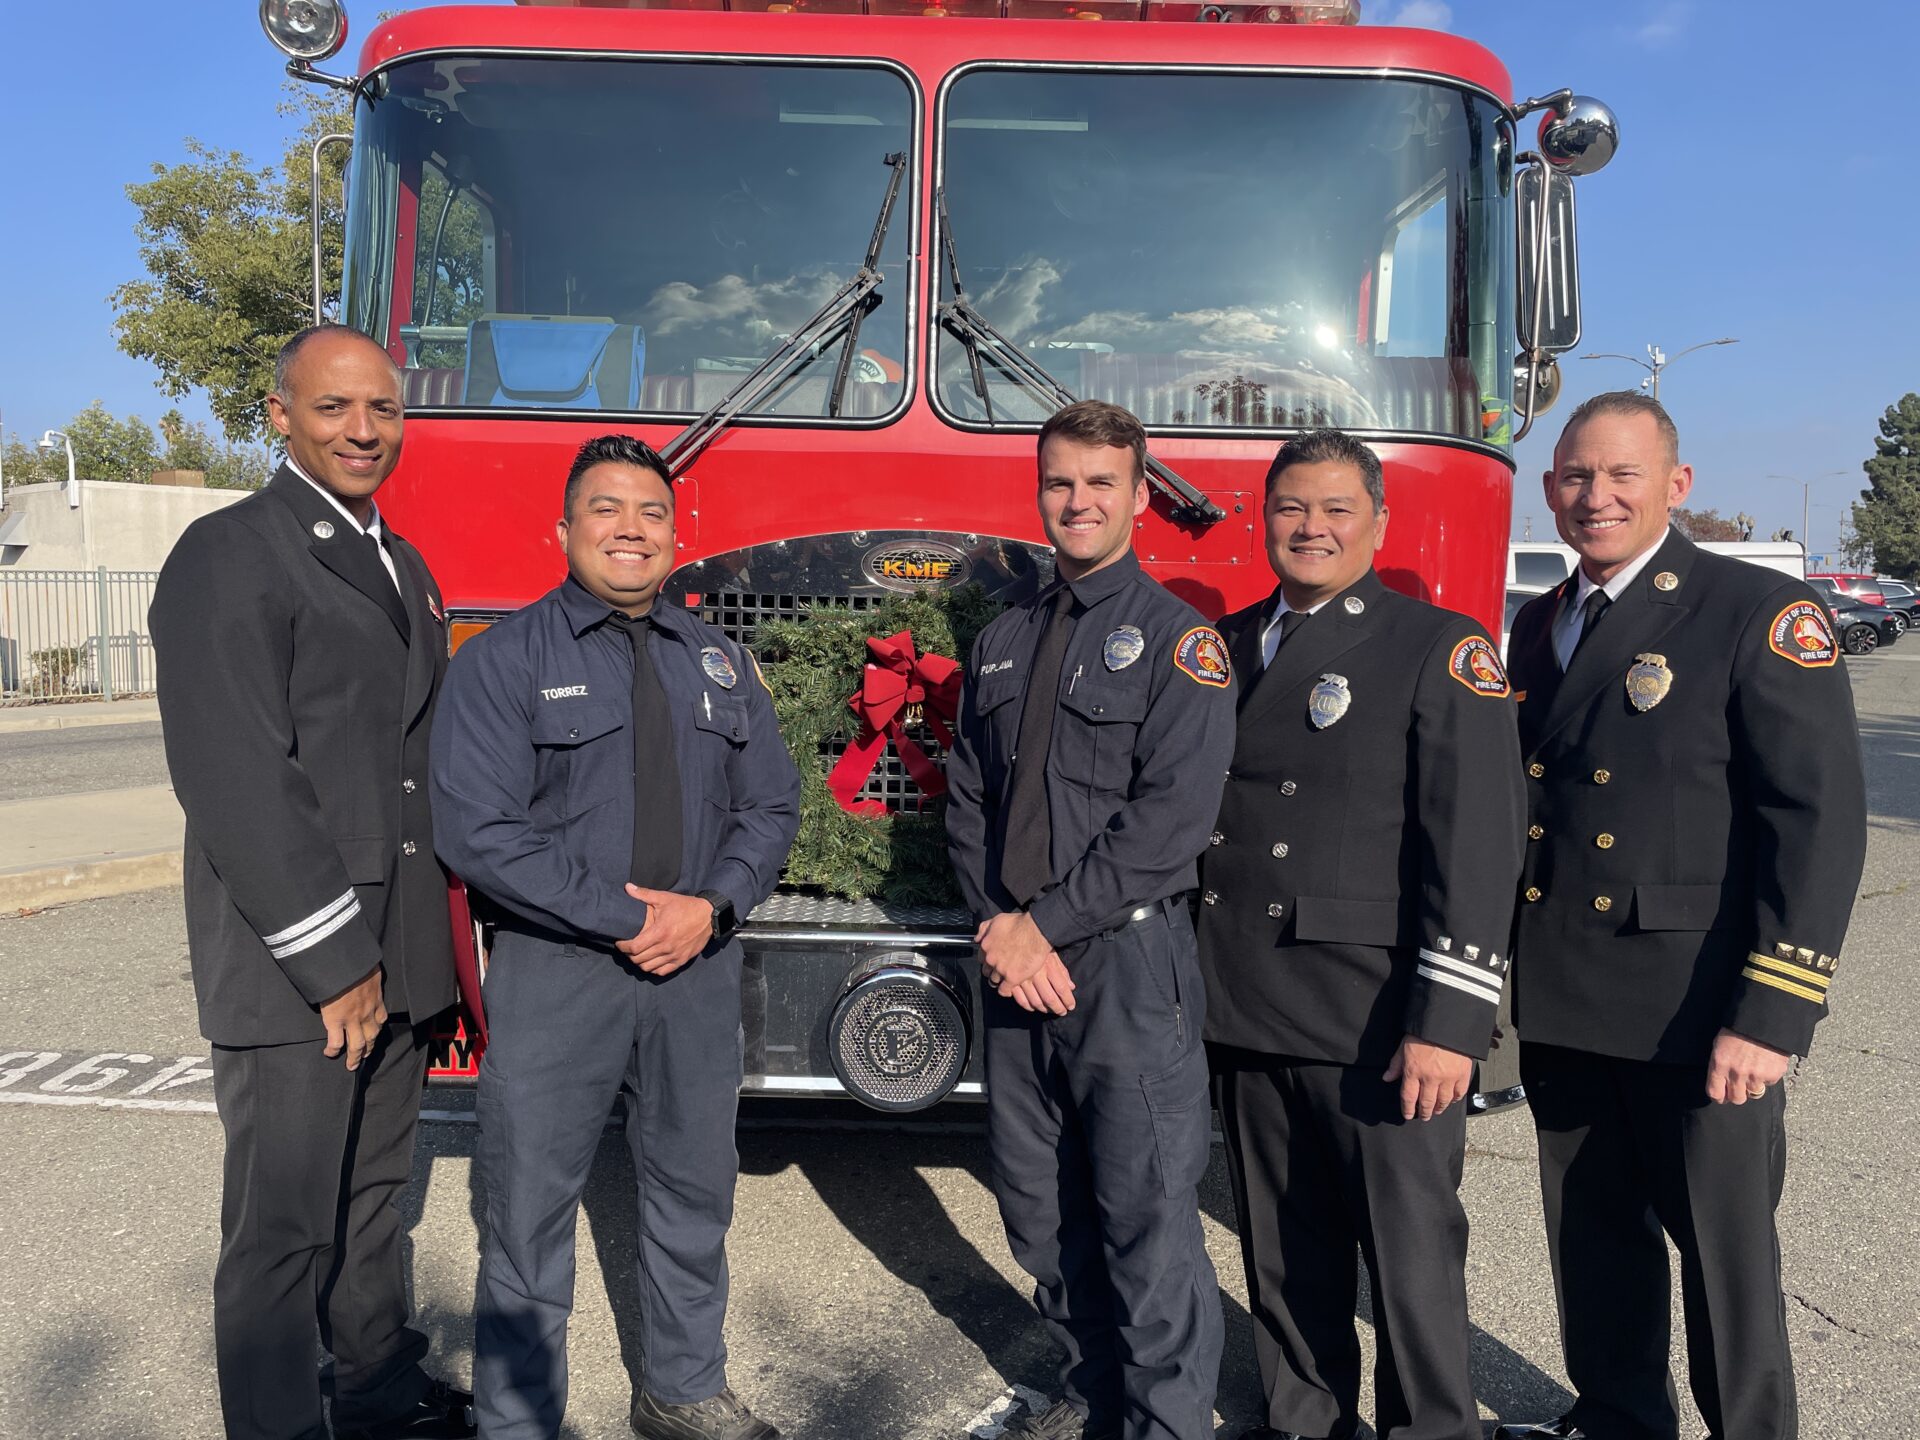 On Thursday, December 7, the Pomona Chamber of Commerce hosted their annual Holiday for Heroes Luncheon at Fuego Metro Events Center in the City of Pomona. The holiday luncheon is a public safety tribute to Pomona’s finest.